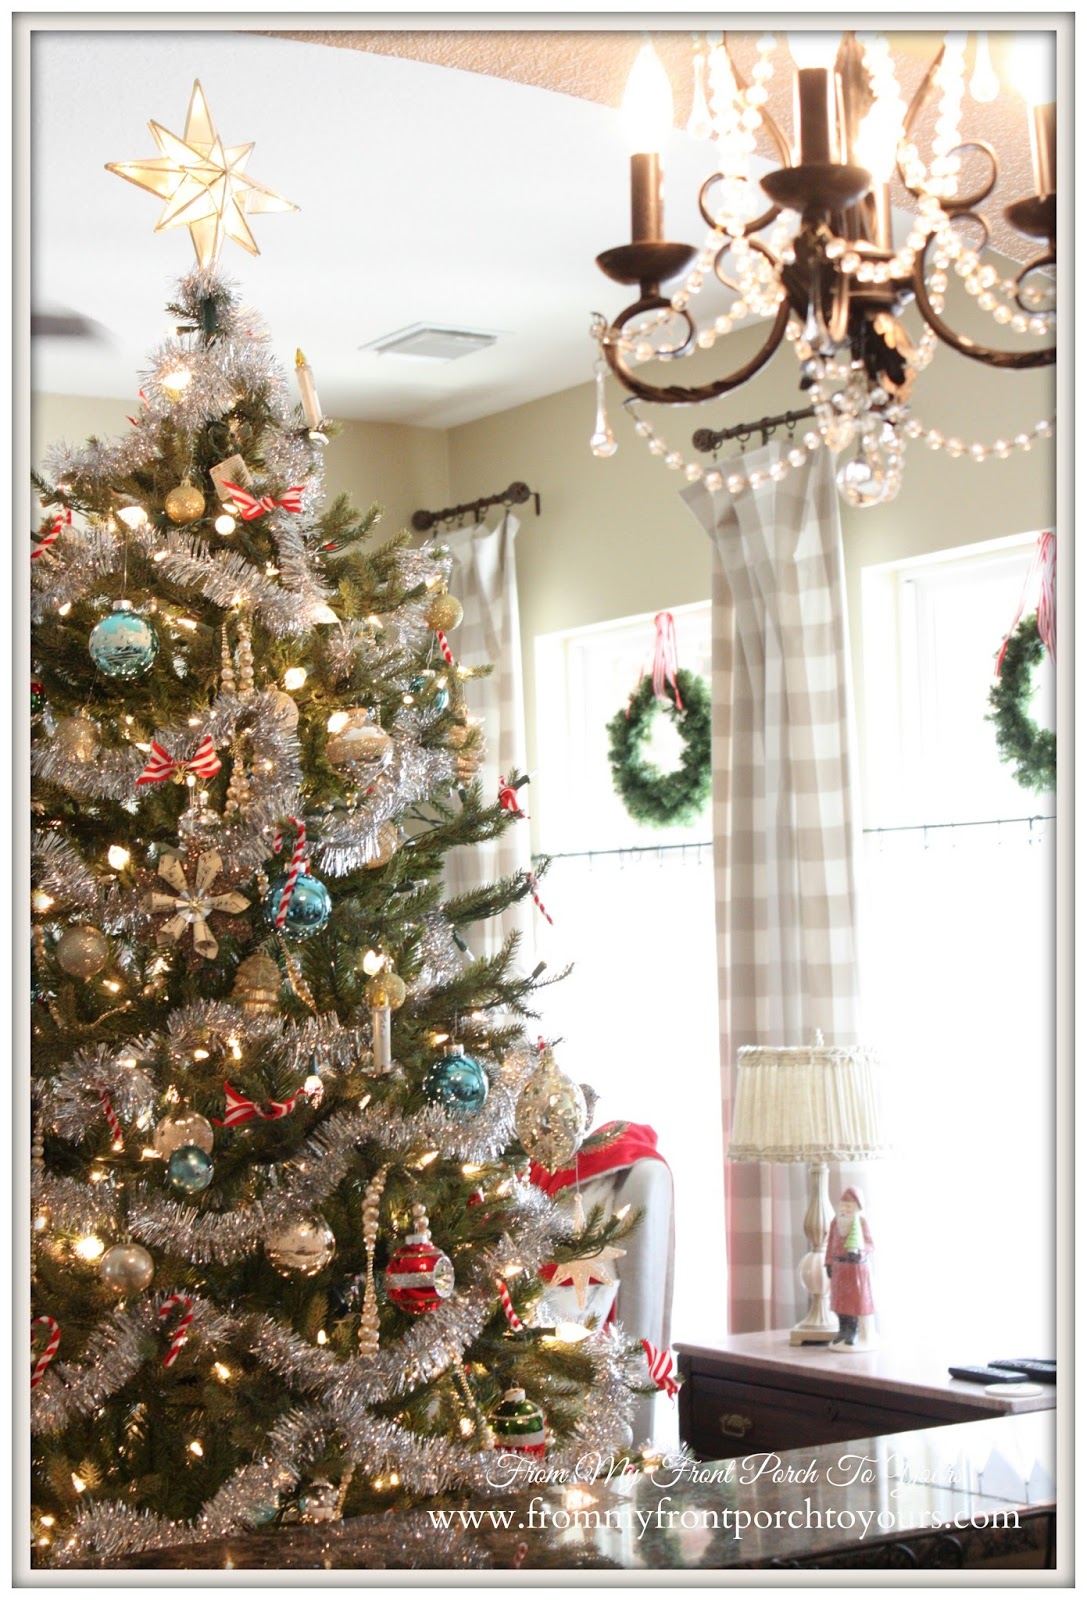 Vintage- Christmas Tree- Farmhouse -Vintage -Christmas-FRench Country- Living Room- From My Front Porch To Yours